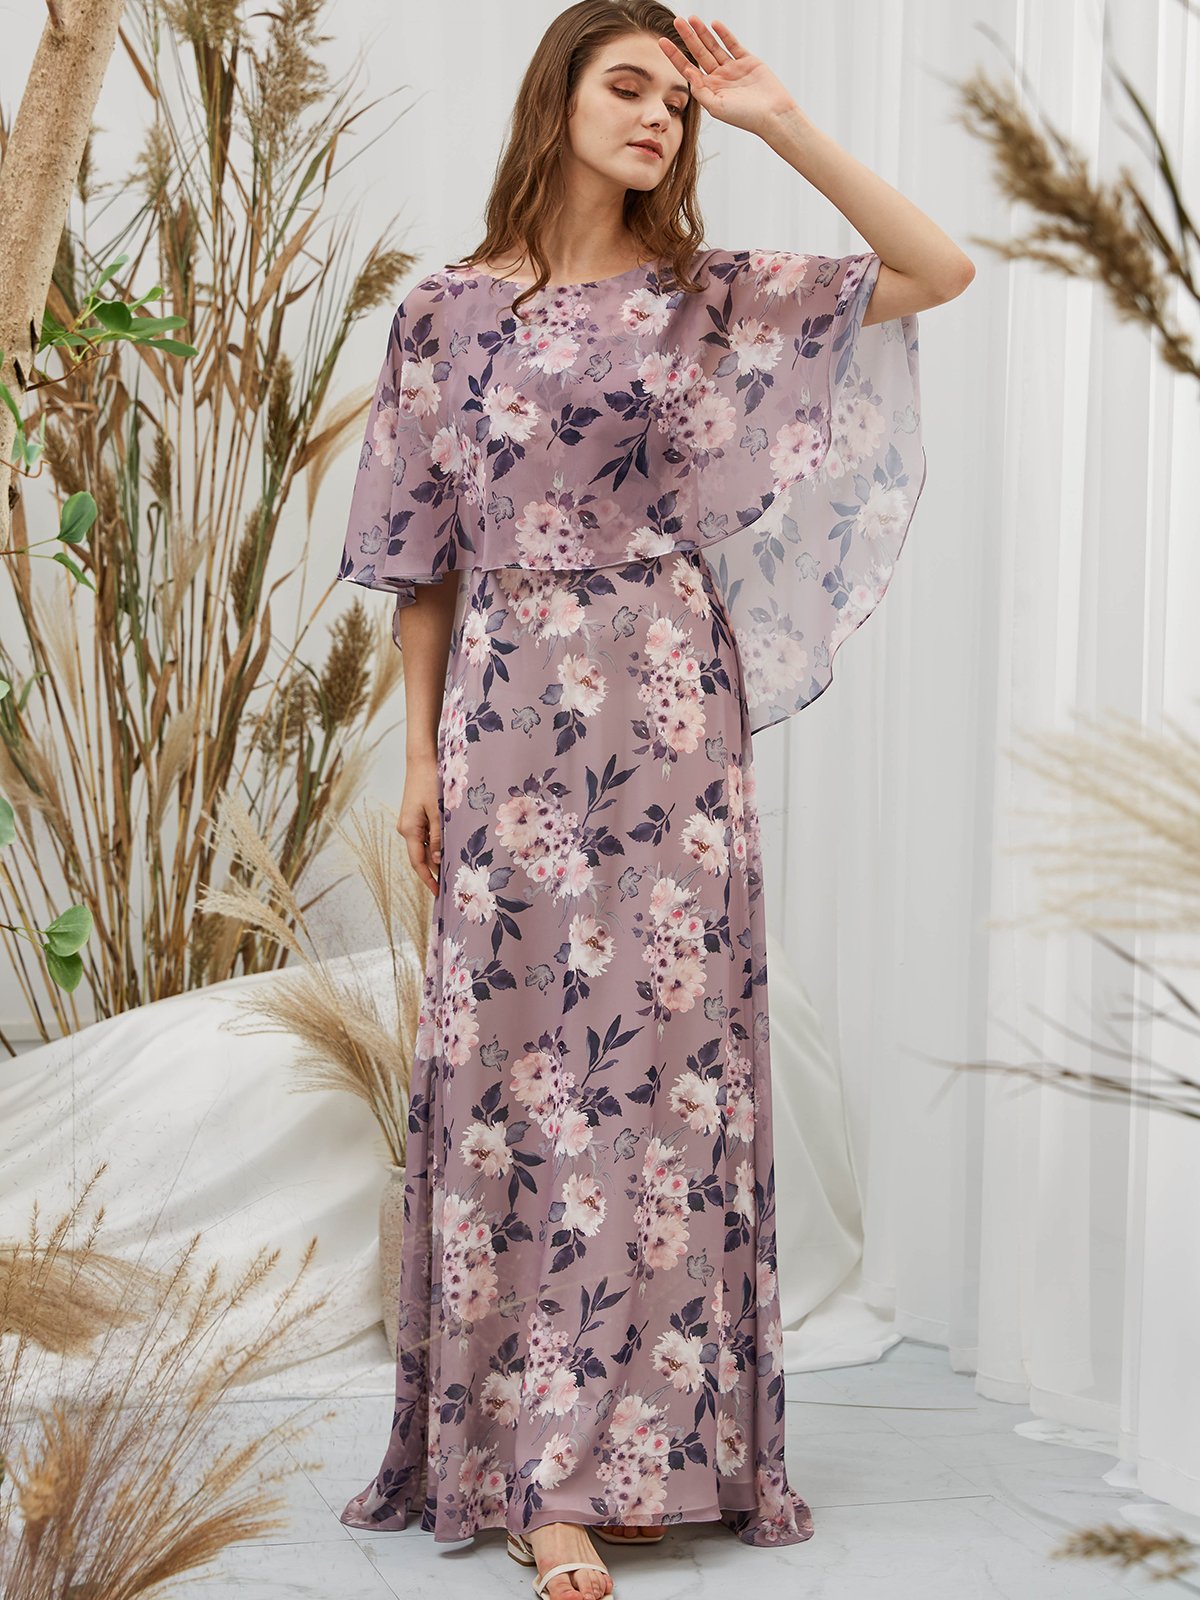 Cape Sleeves Boat Neck Chiffon Print Floral Wisteria Floor Length Formal Evening Gown